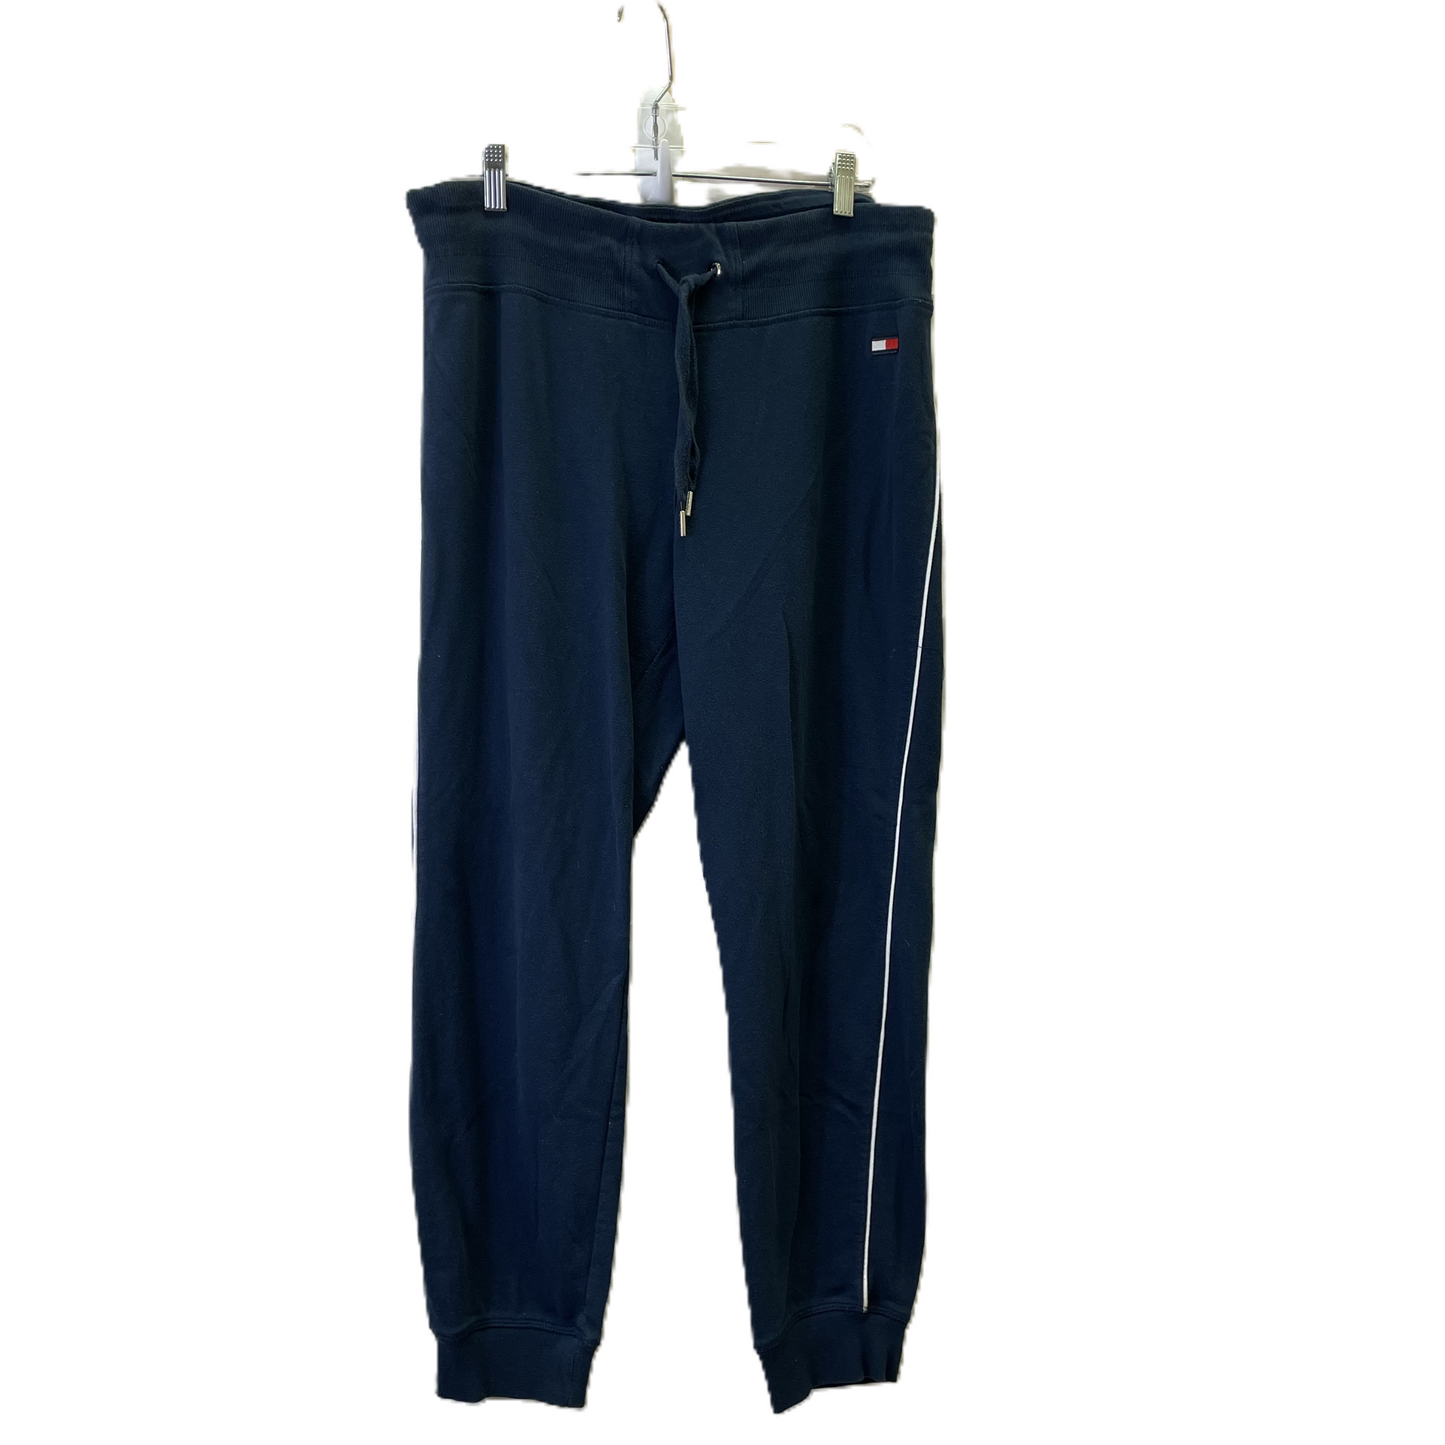 Athletic Pants By Tommy Hilfiger  Size: Xl